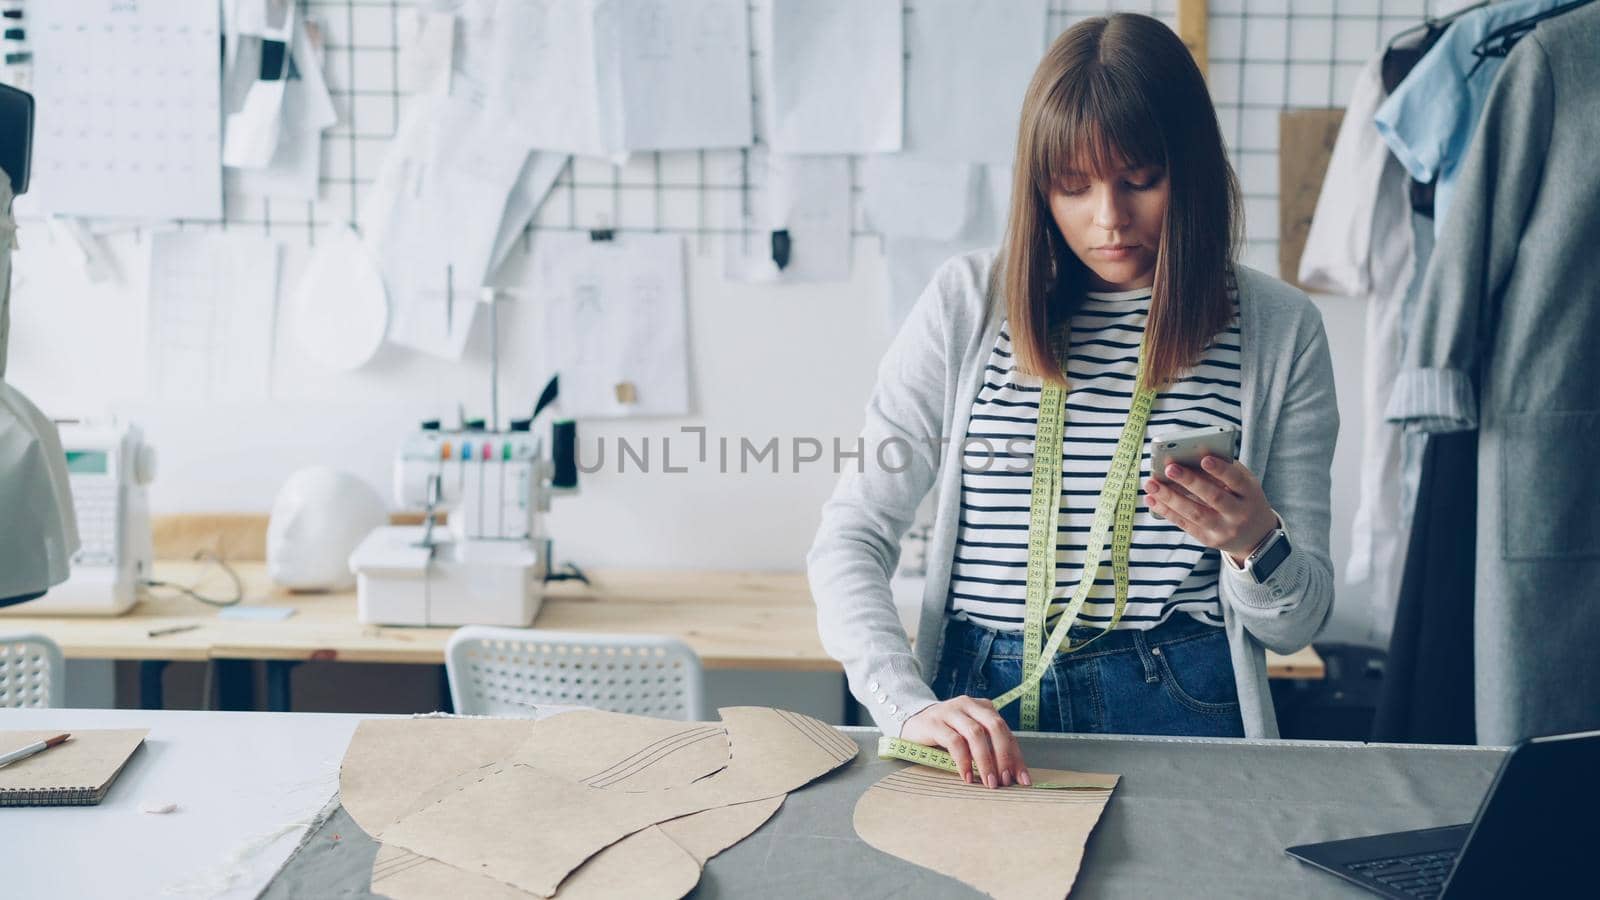 Clothing design entrepreneur is checking paper sewing drafts and looking at smartphone. She is examining every cutout and thinking about future garment. Modern technology in sewing industry concept.